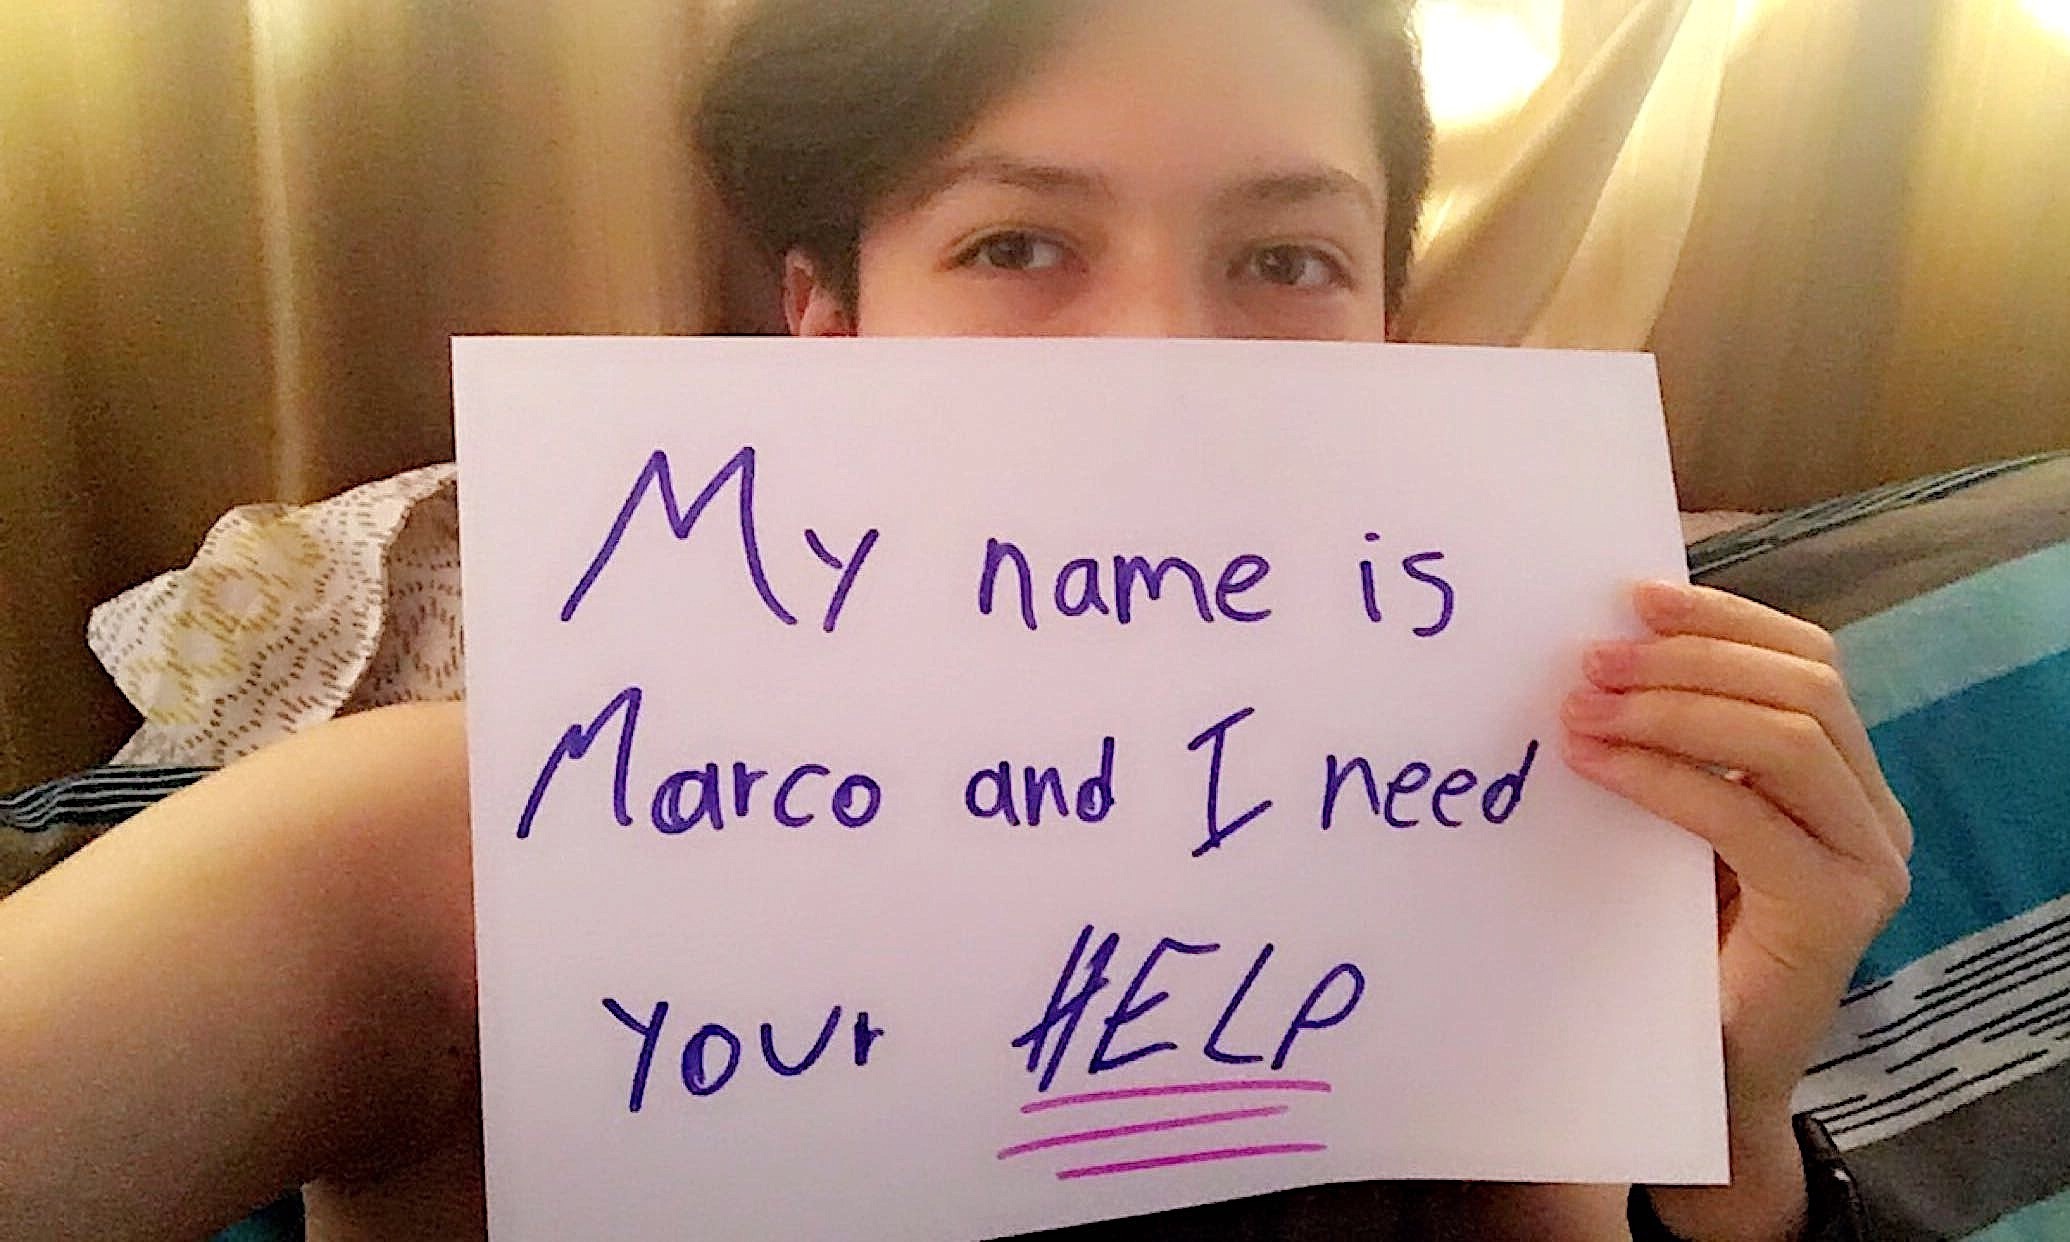 Hey! My name is Marco and I need your help!